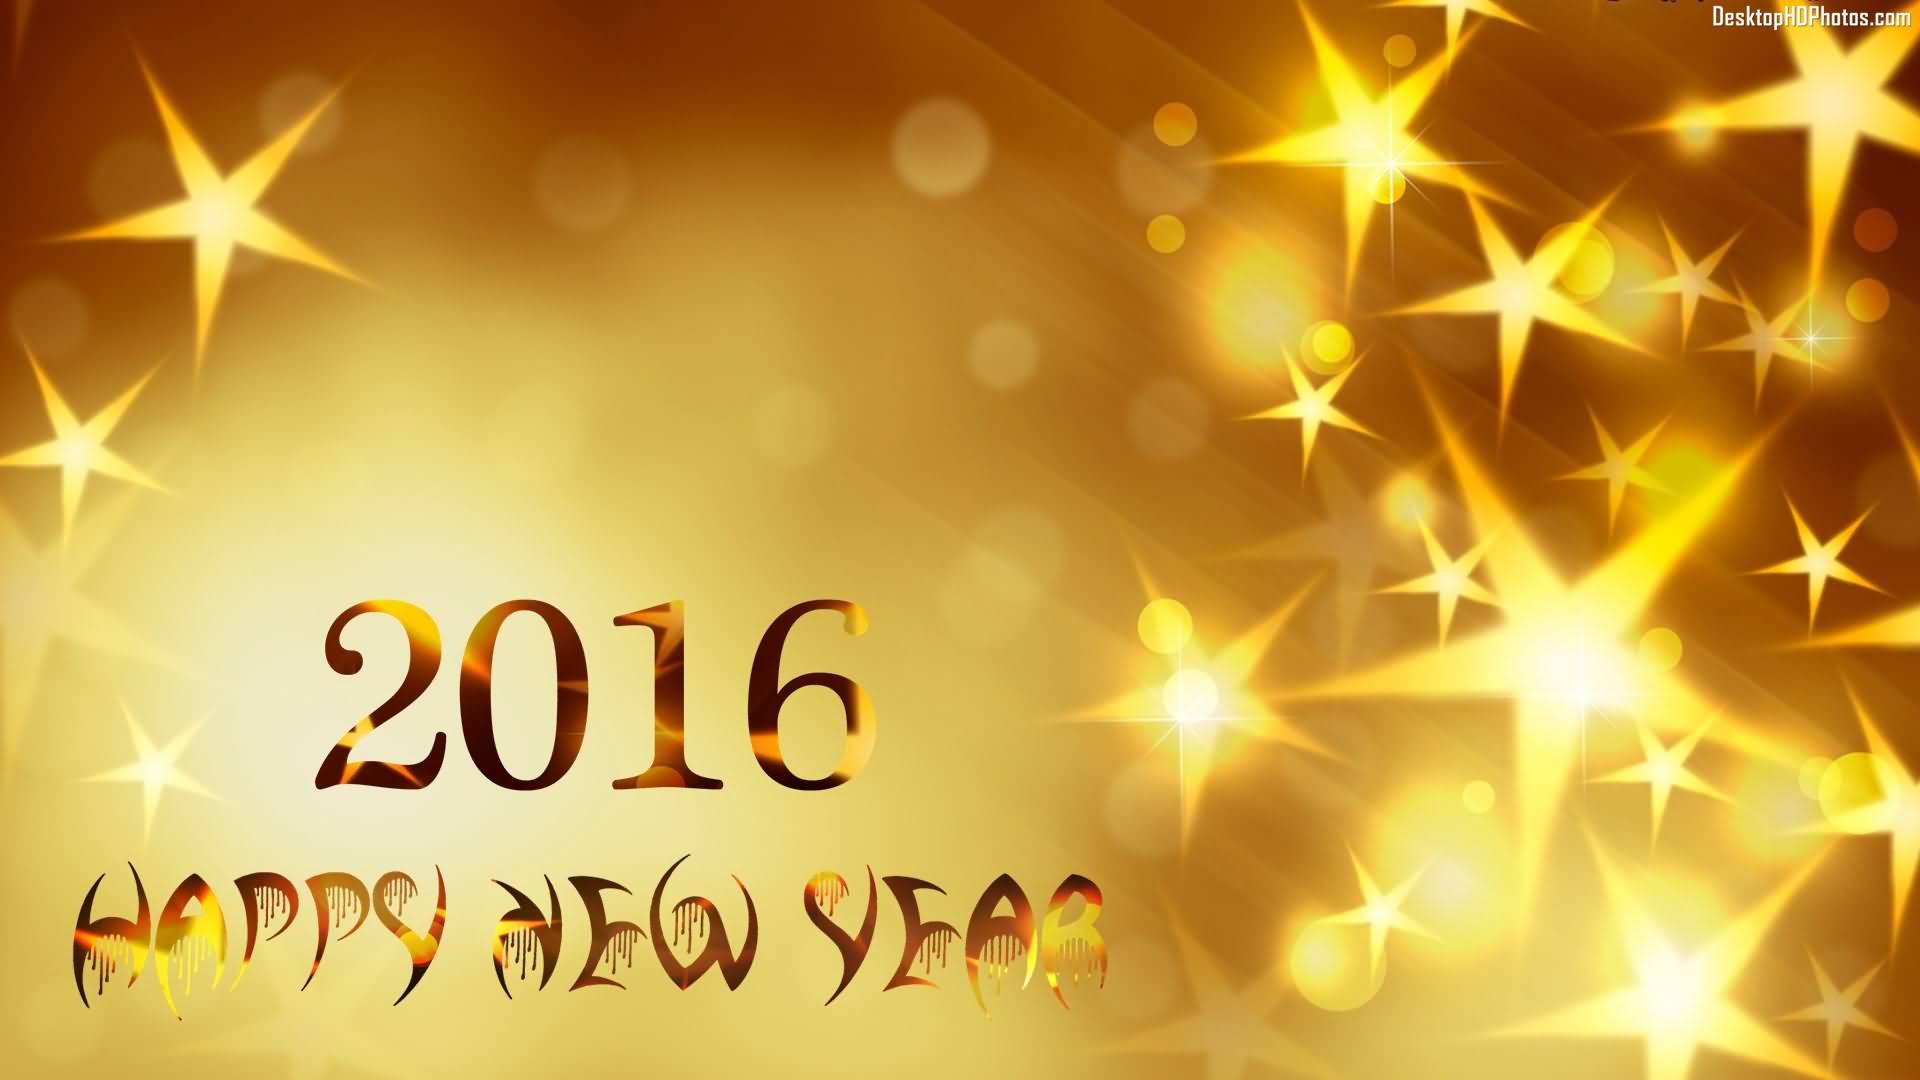 Golden 2016 Happy New Year Wallpaper Happy New Year Image With